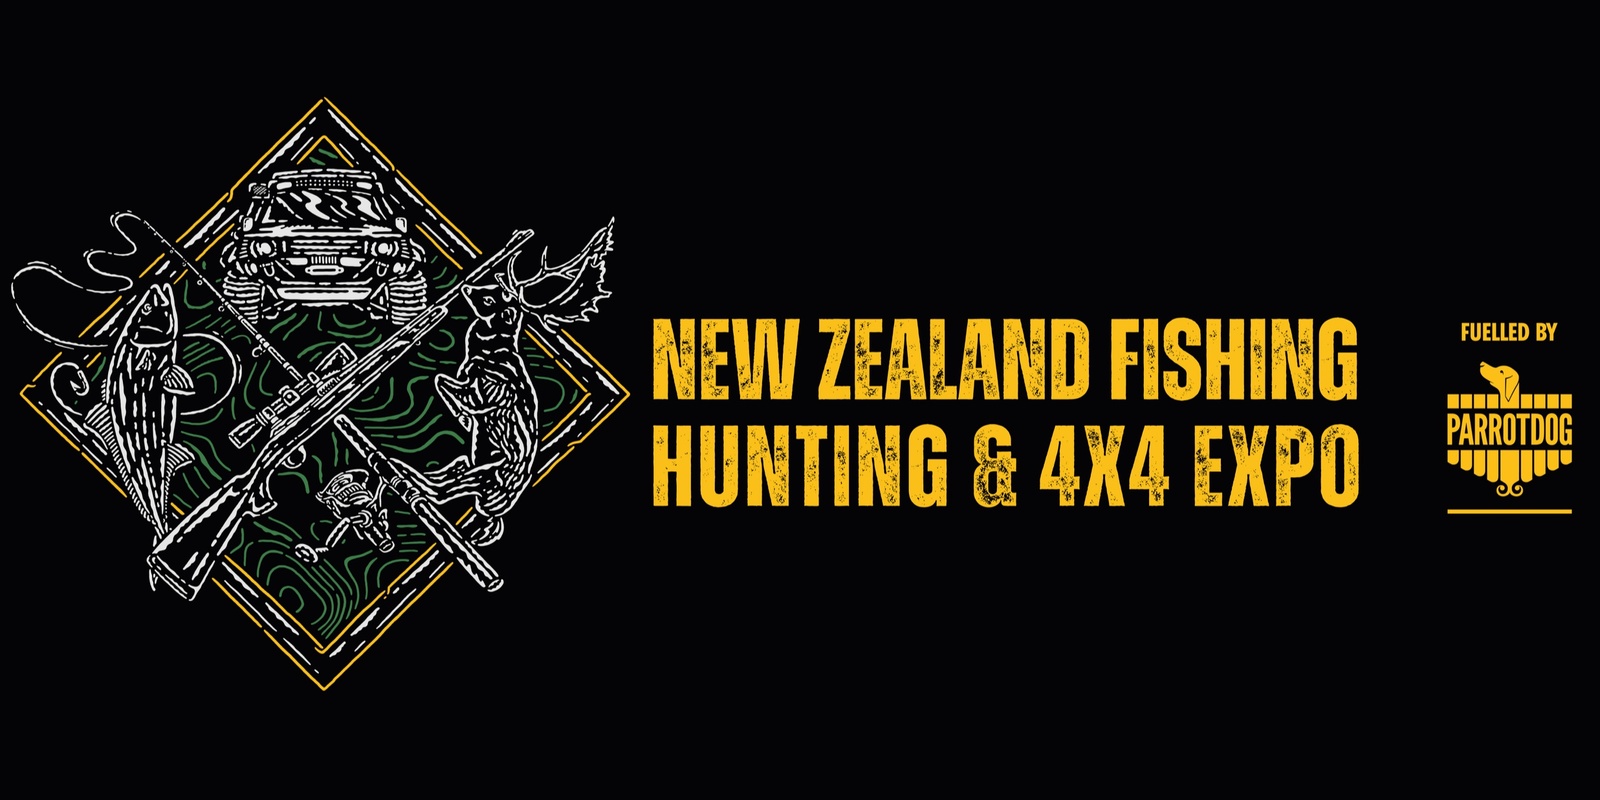 New Zealand Fishing Hunting & 4x4 Expo fuelled by Parrotdog